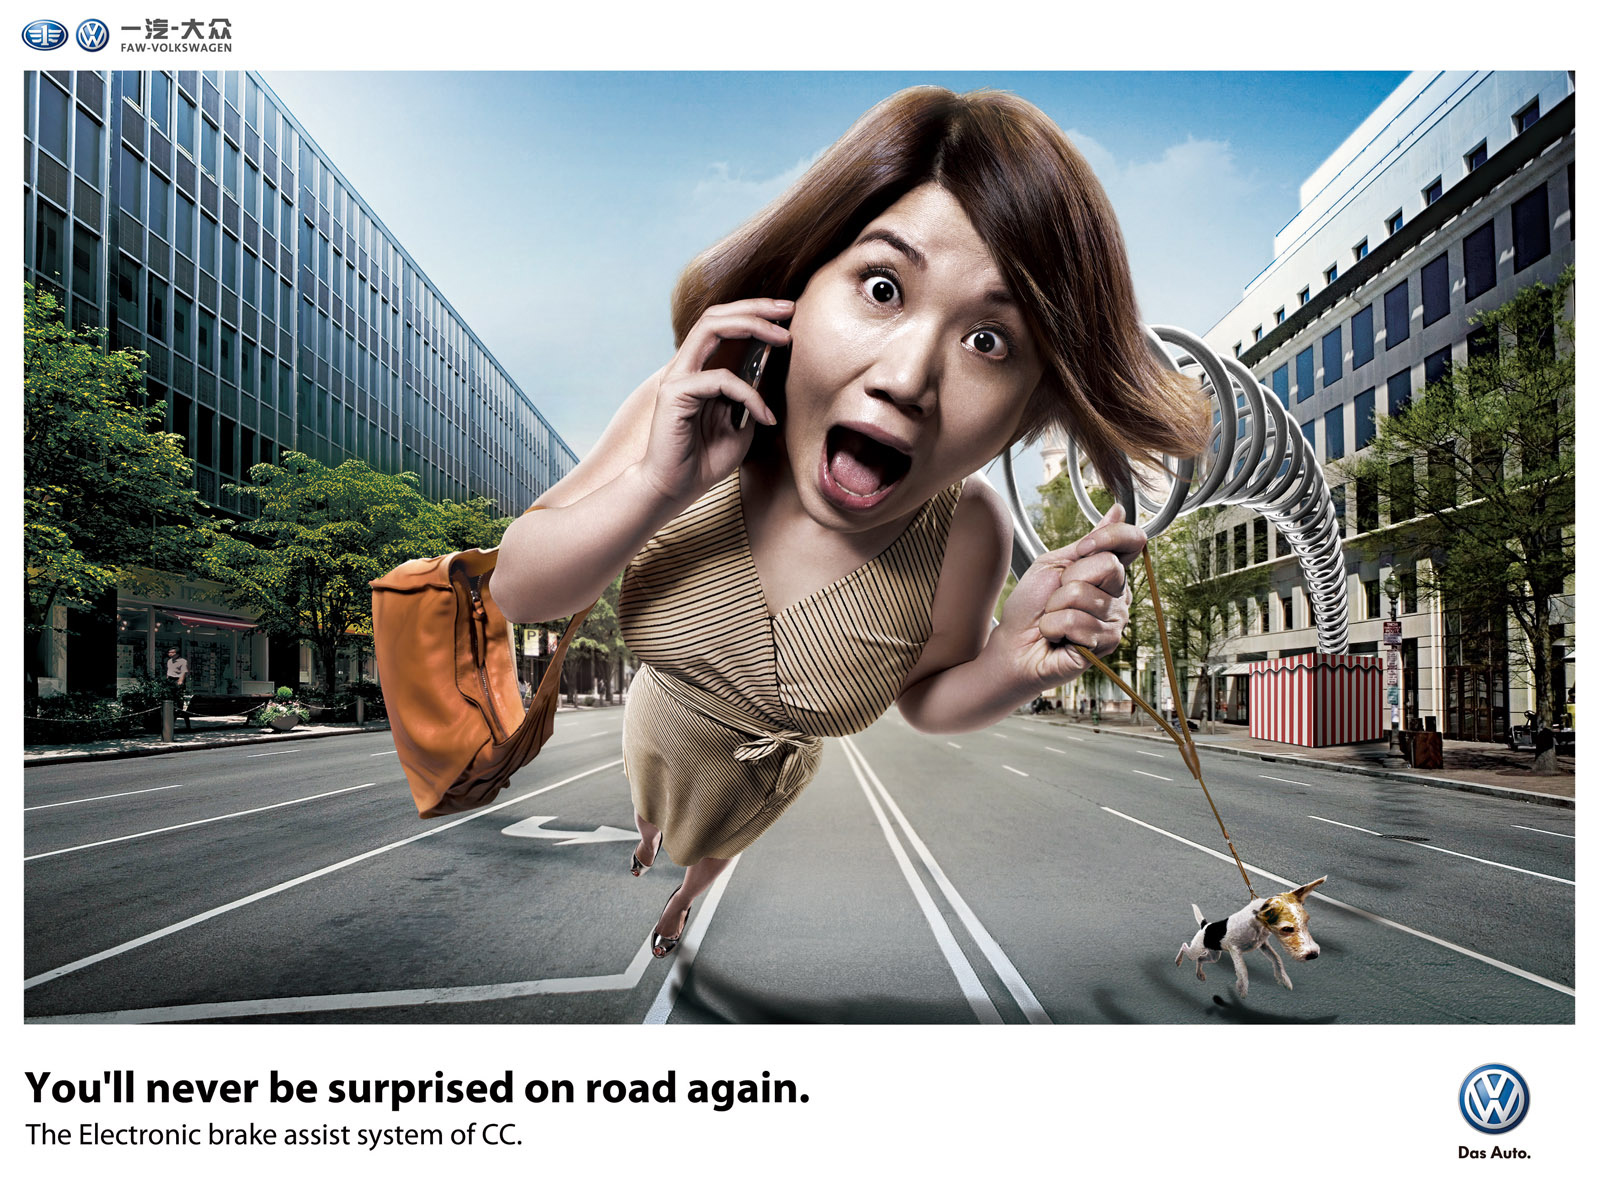 Volkswagen - You'll never be surprised on road again